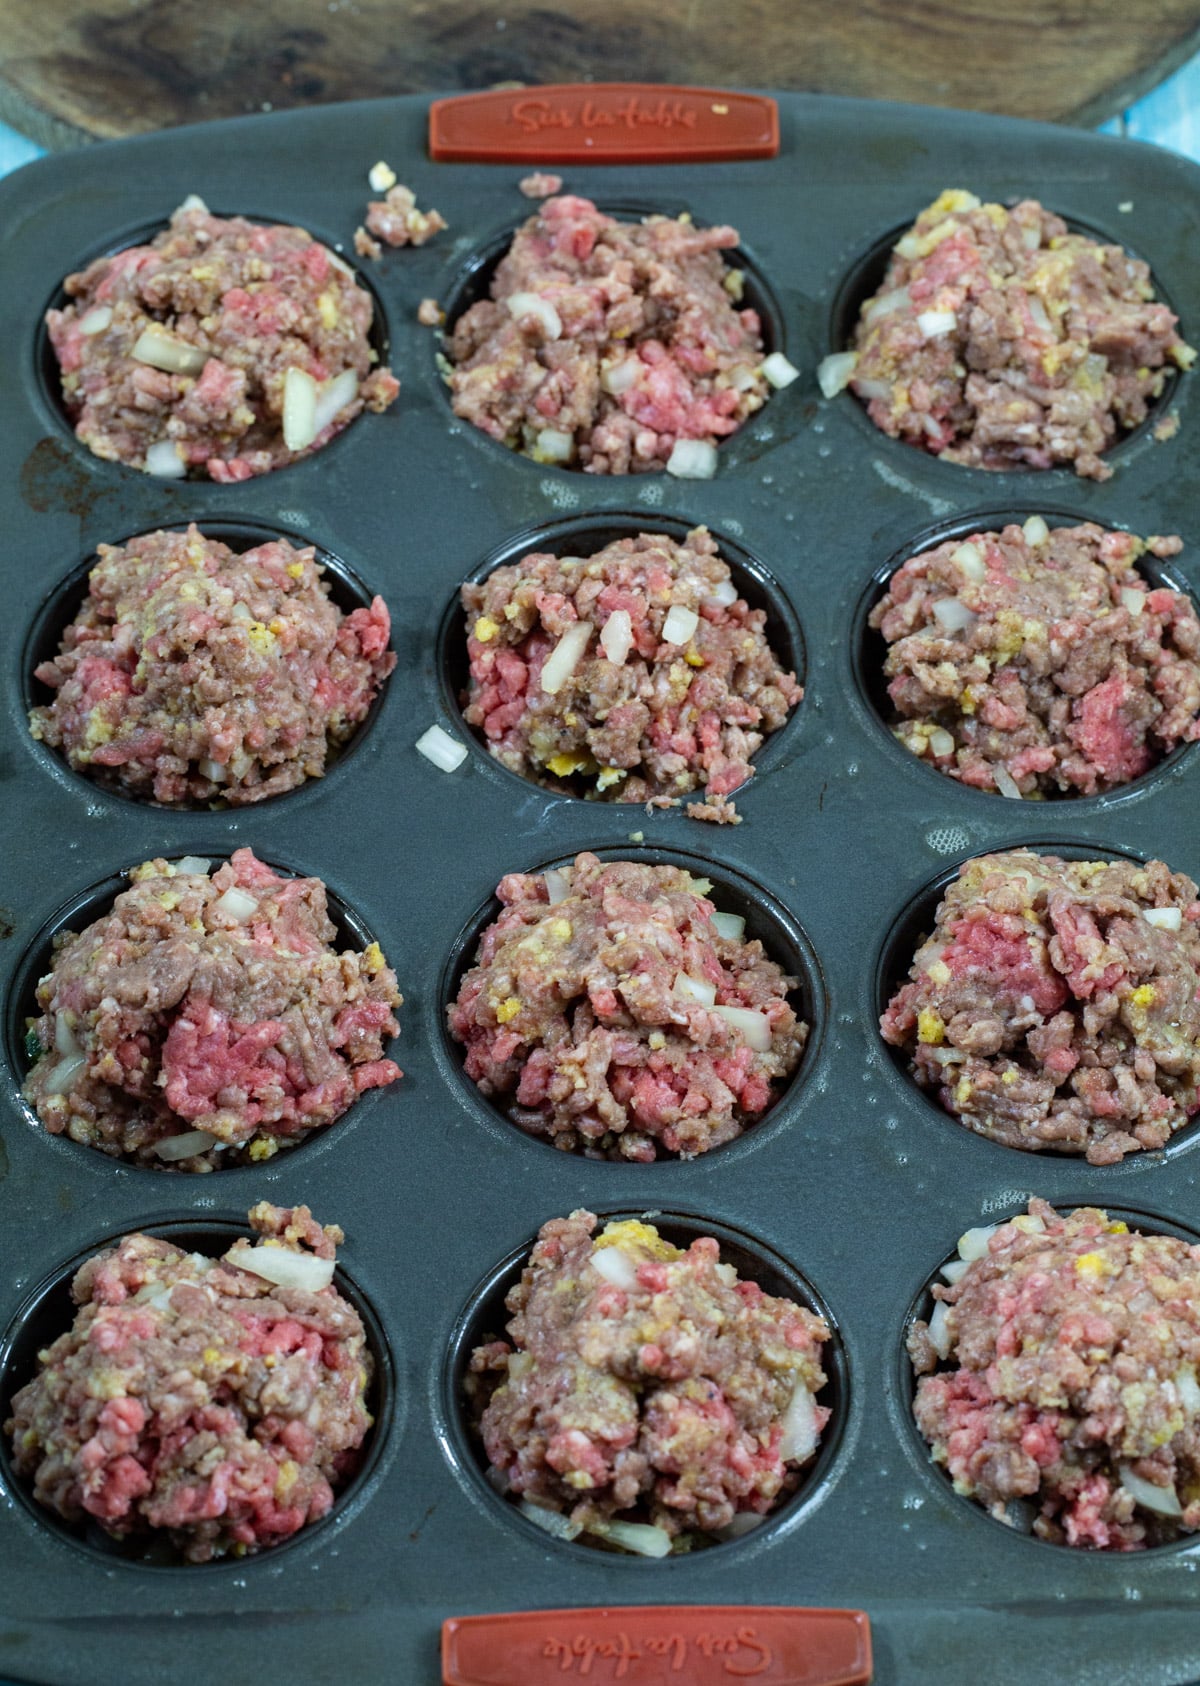 Unbaked meatloaf in muffin cups.